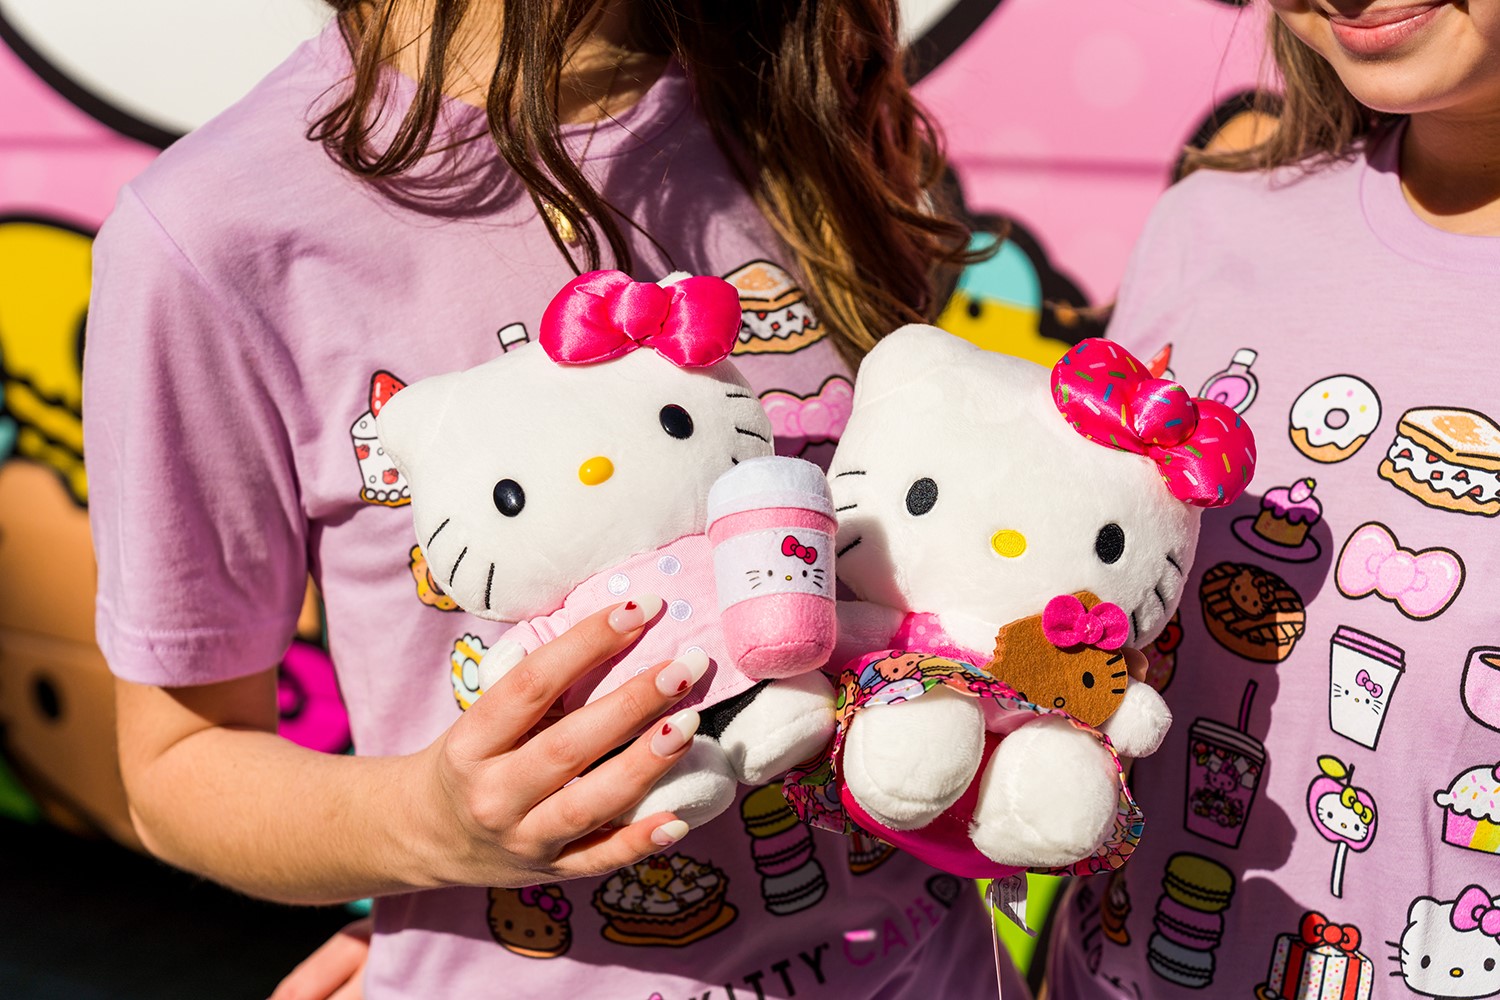 Hello Kitty Cafe entrepreneurs expand the fun with Hot Wheels, Barbie  trucks – Orange County Register